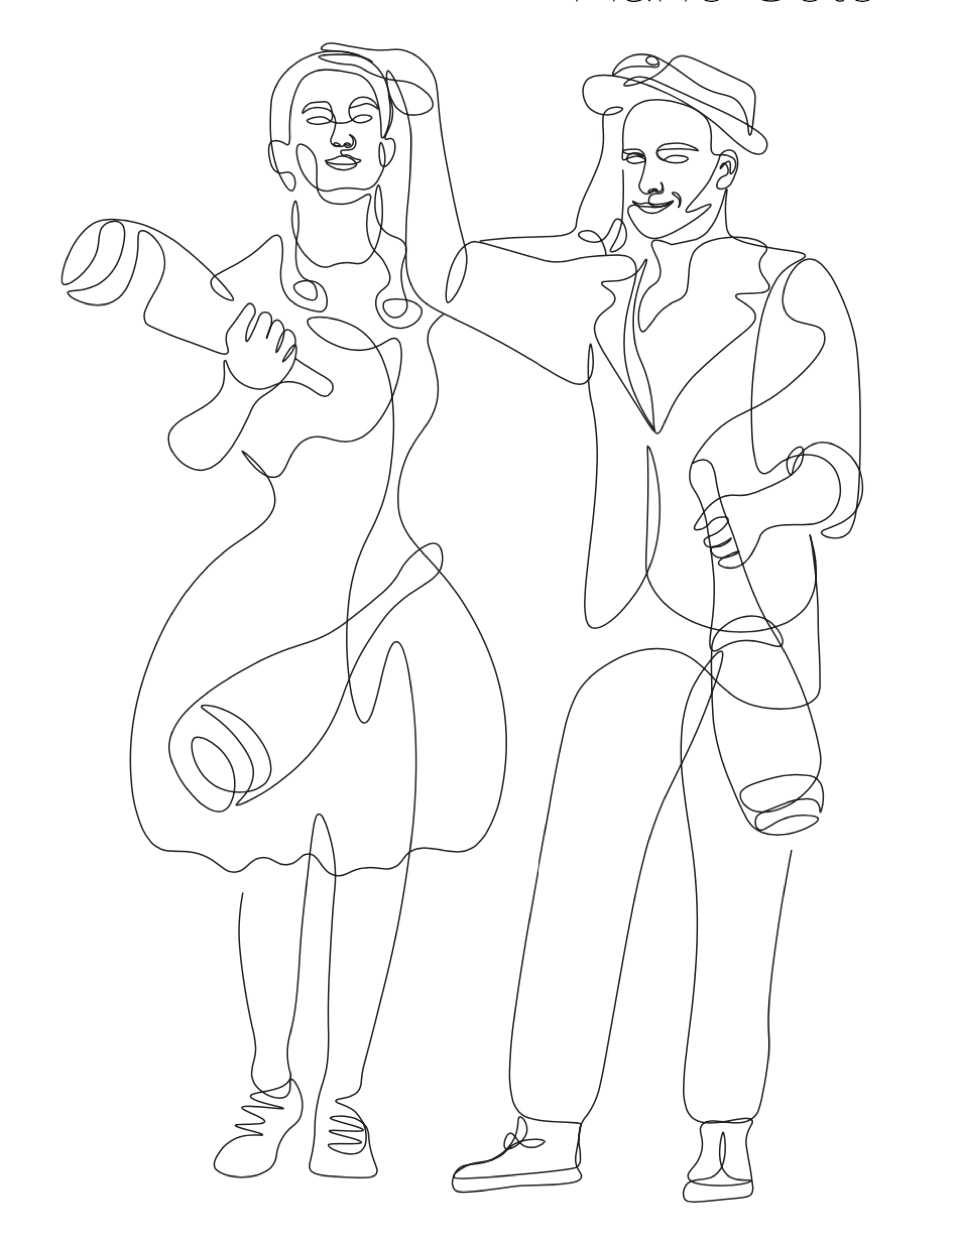 continuous line drawing of the give and take jugglers duo